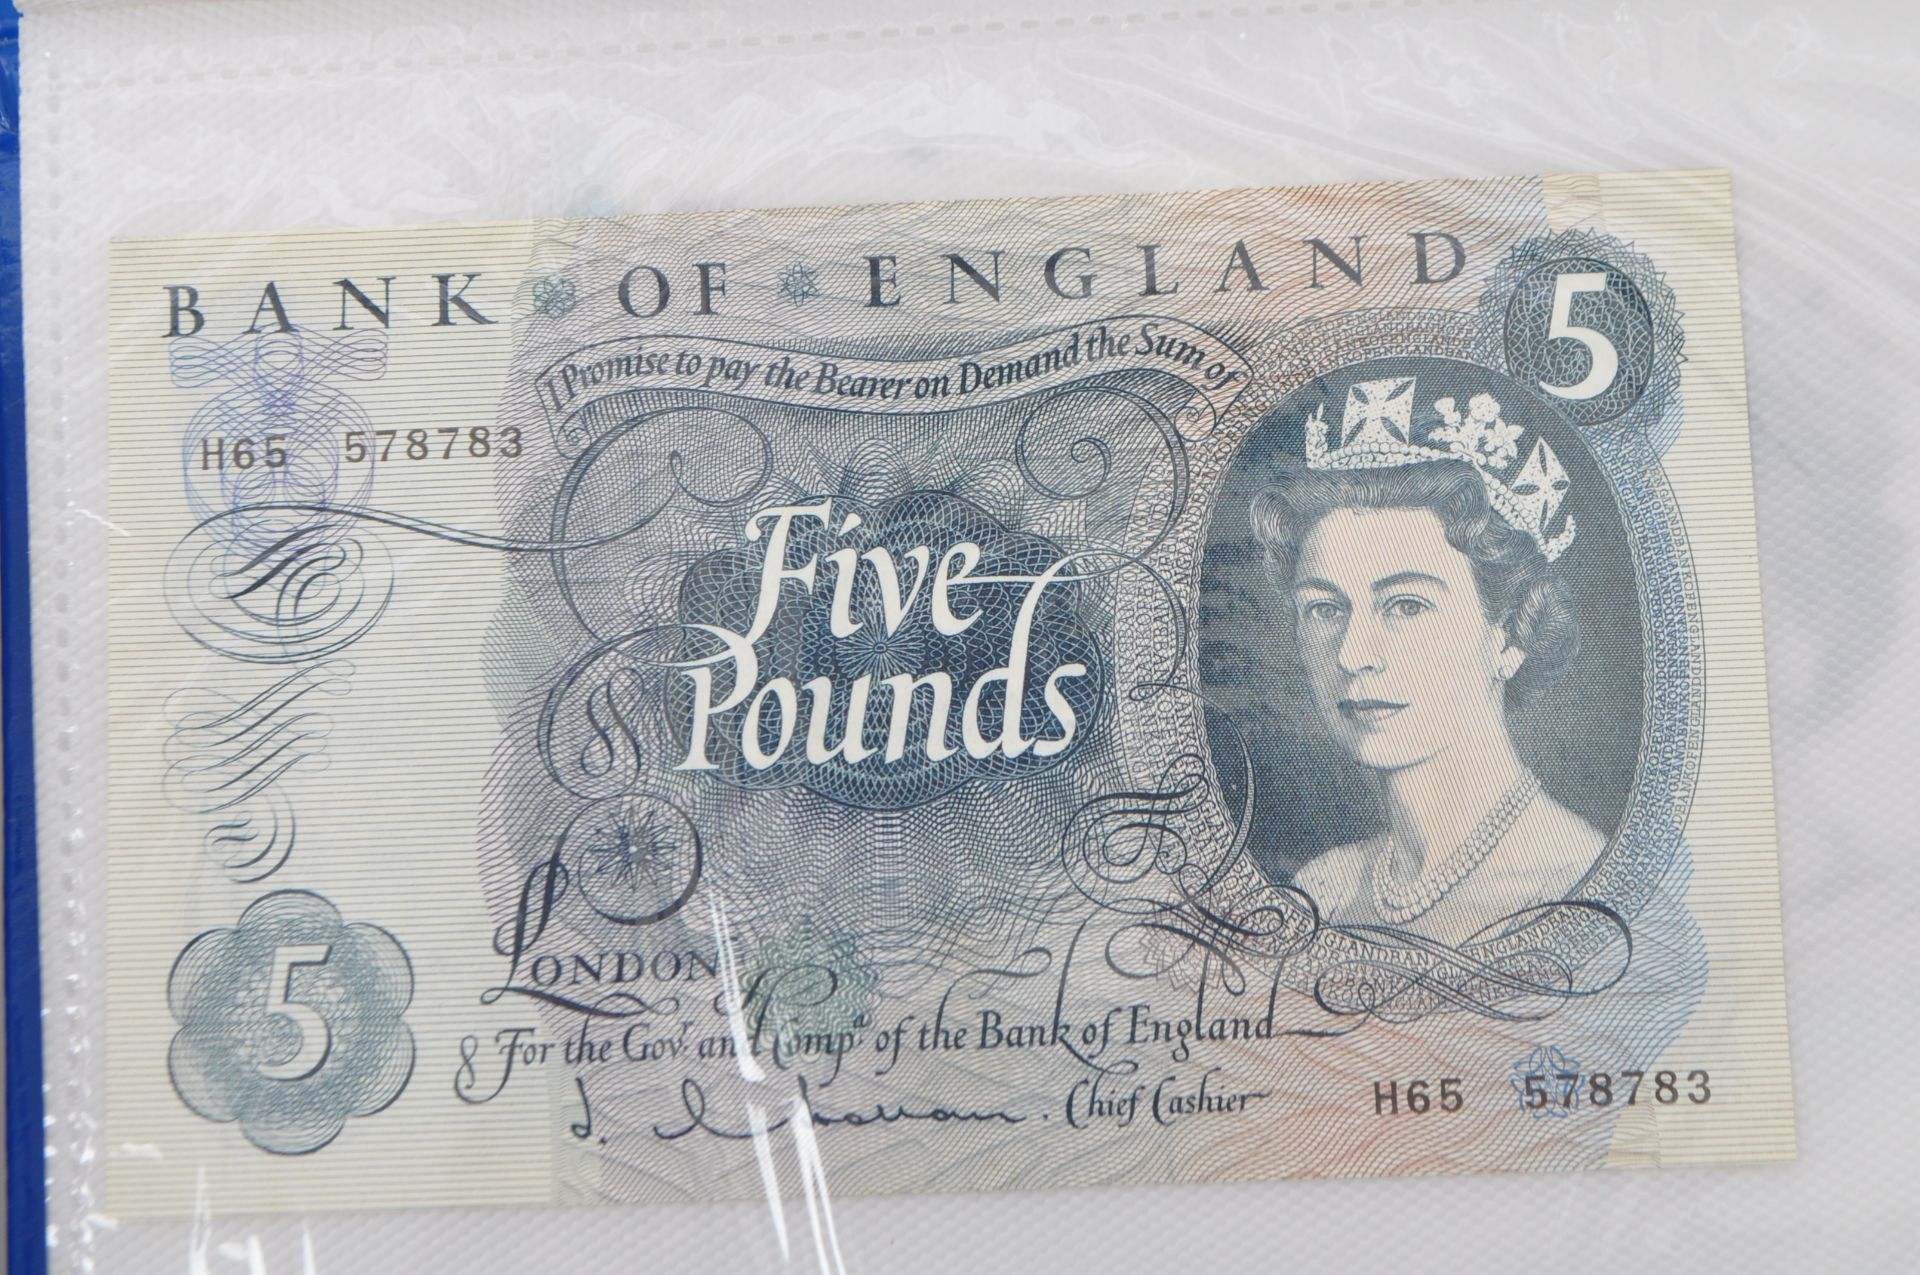 A COLLECTION OF UK UNCIRCULATED AND CIRCULATED BANKNOTES - Image 4 of 6